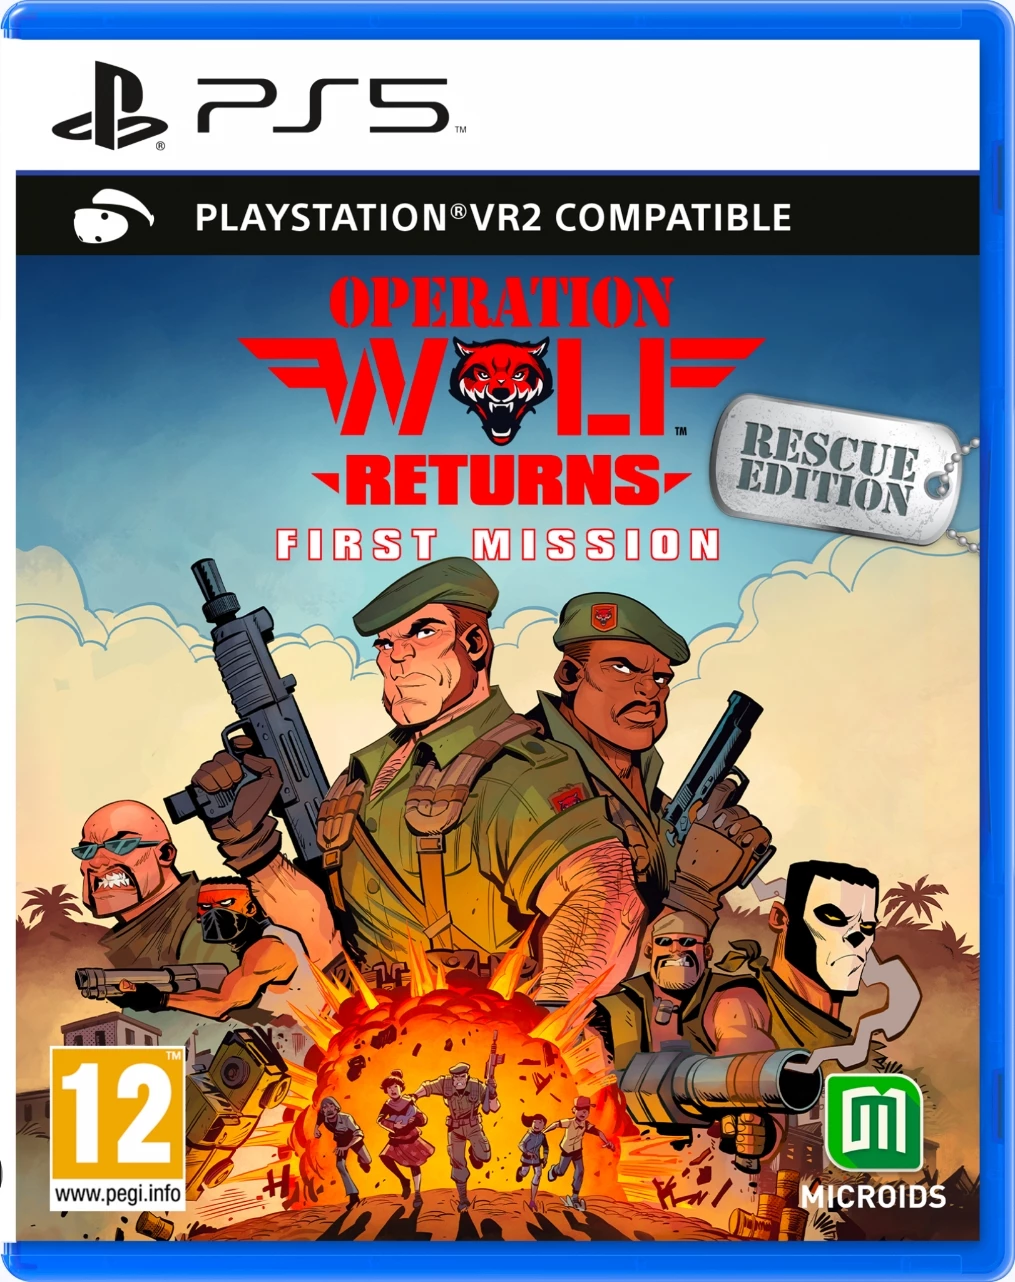 Operation Wolf Returns: First Mission - Rescue Edition (PS5), Microids